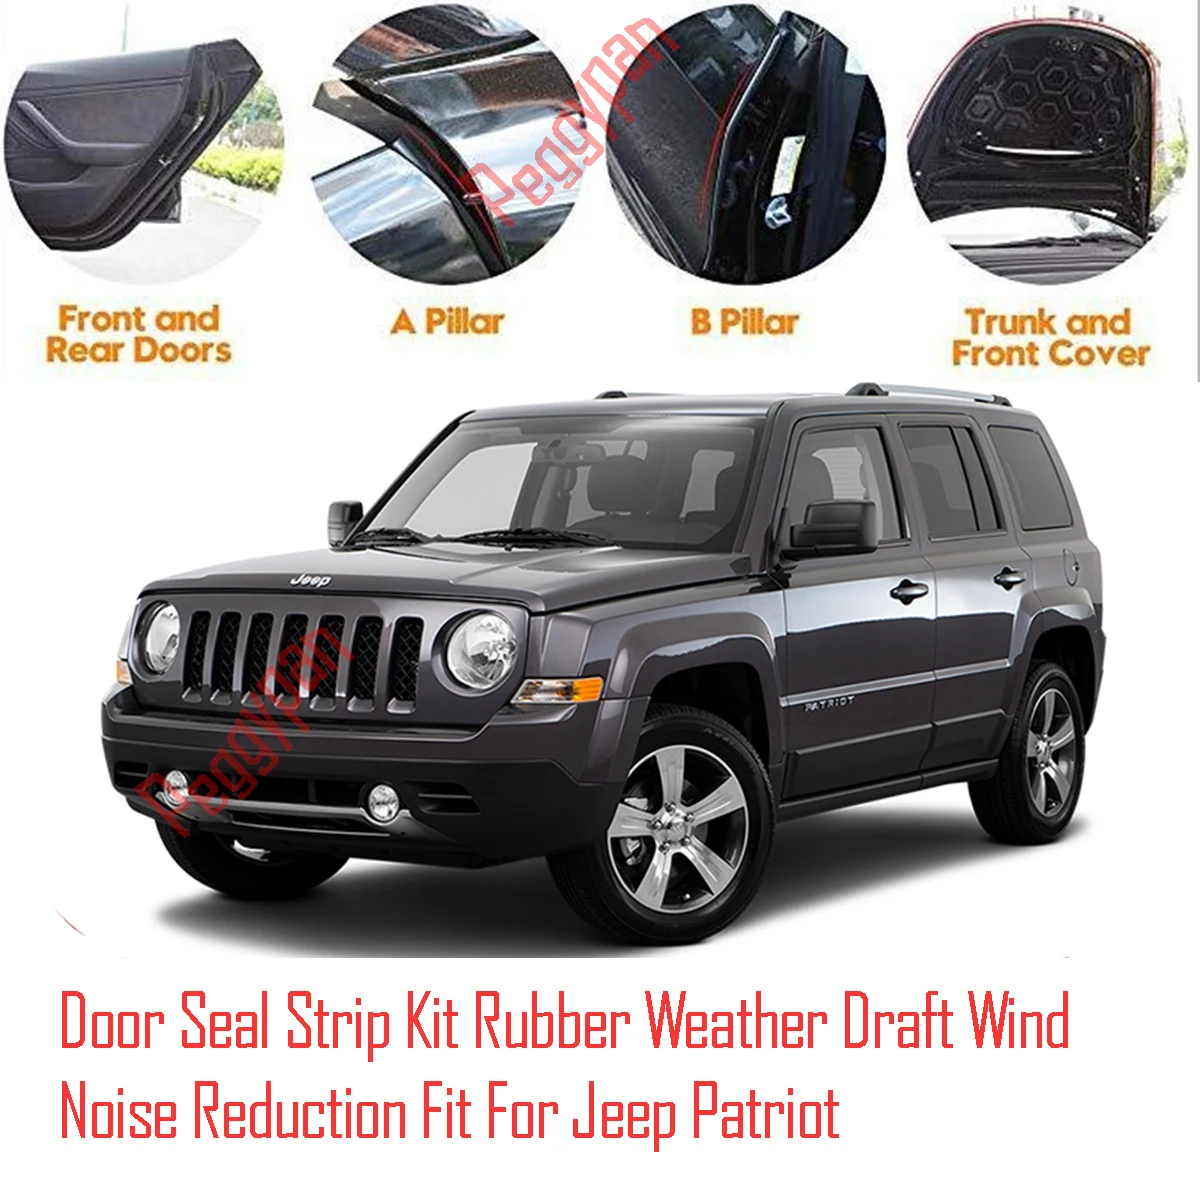 Door Seal Strip Kit Self Adhesive Window Engine Cover Soundproof Rubber Weather Draft Wind Noise Reduction Fit For Jeep Patriot